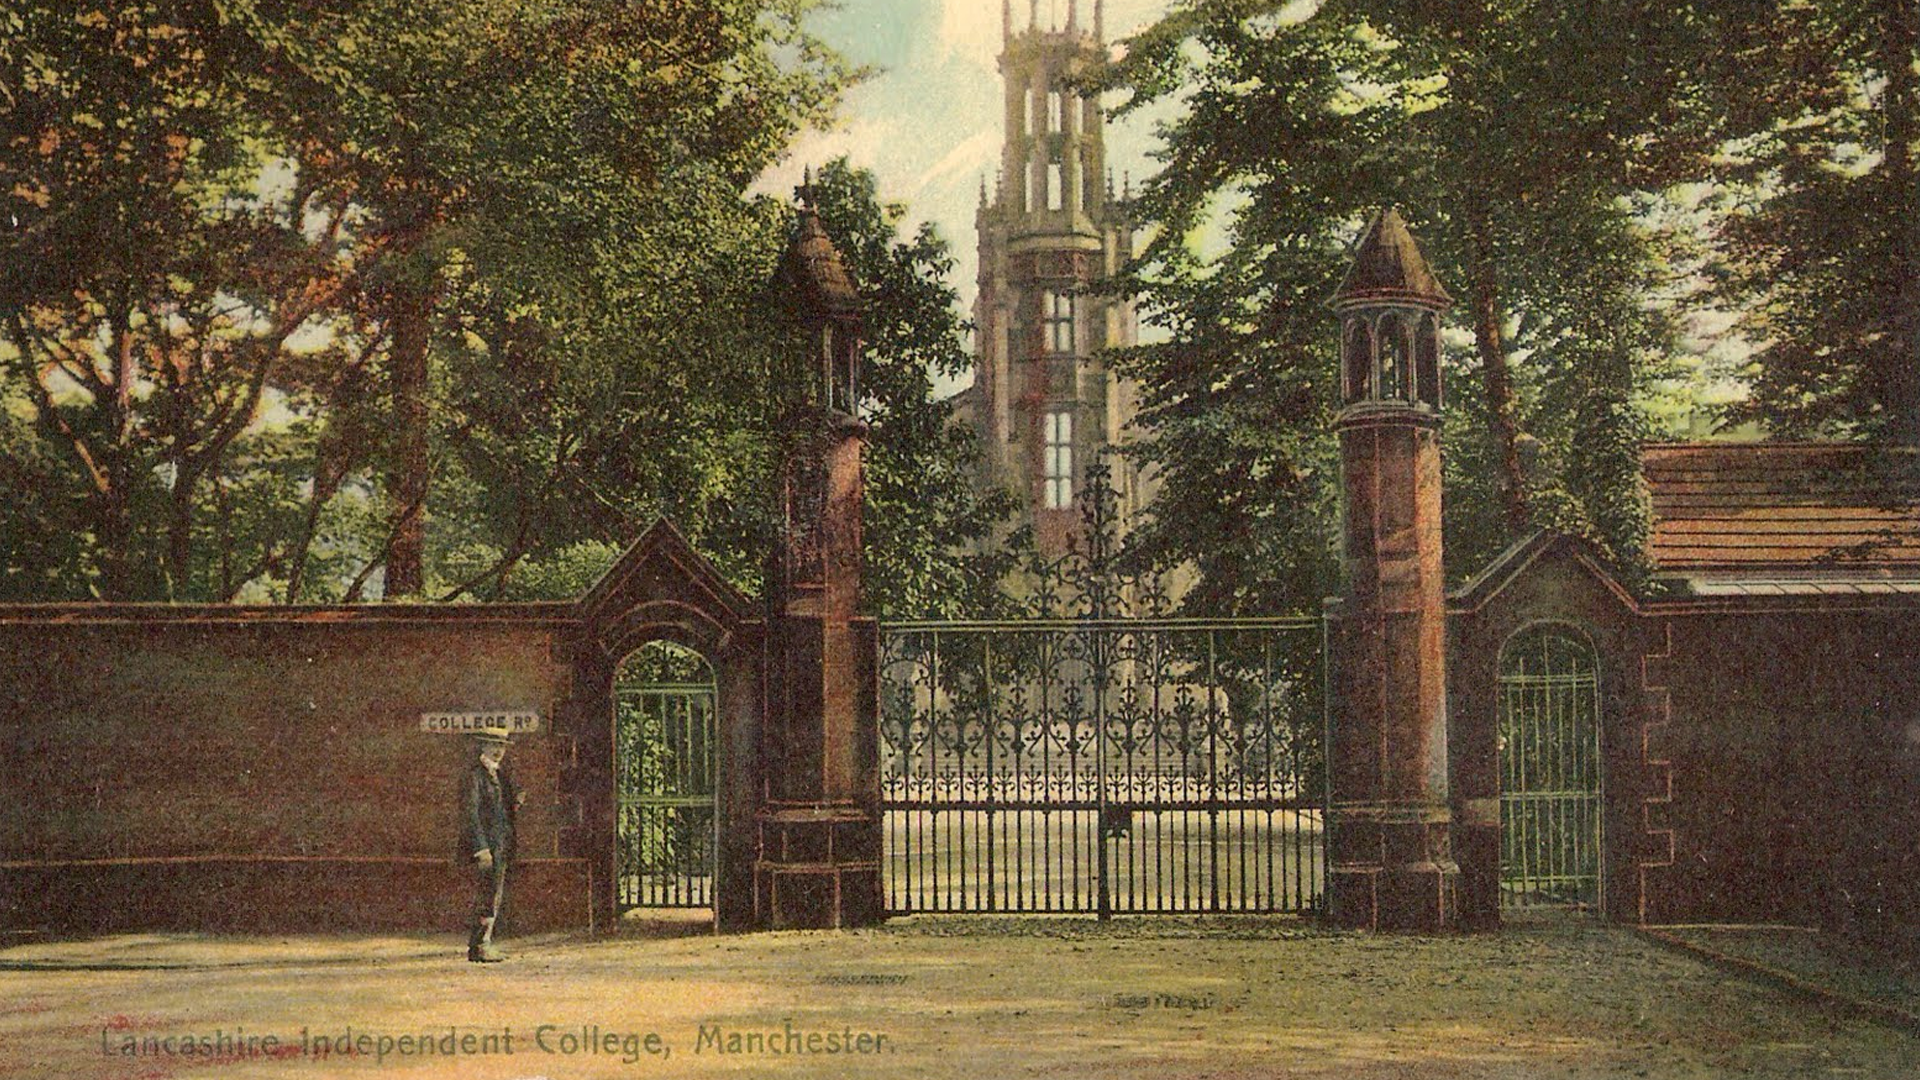 Whalley Range Labour - Lancashire Independant College on College Road